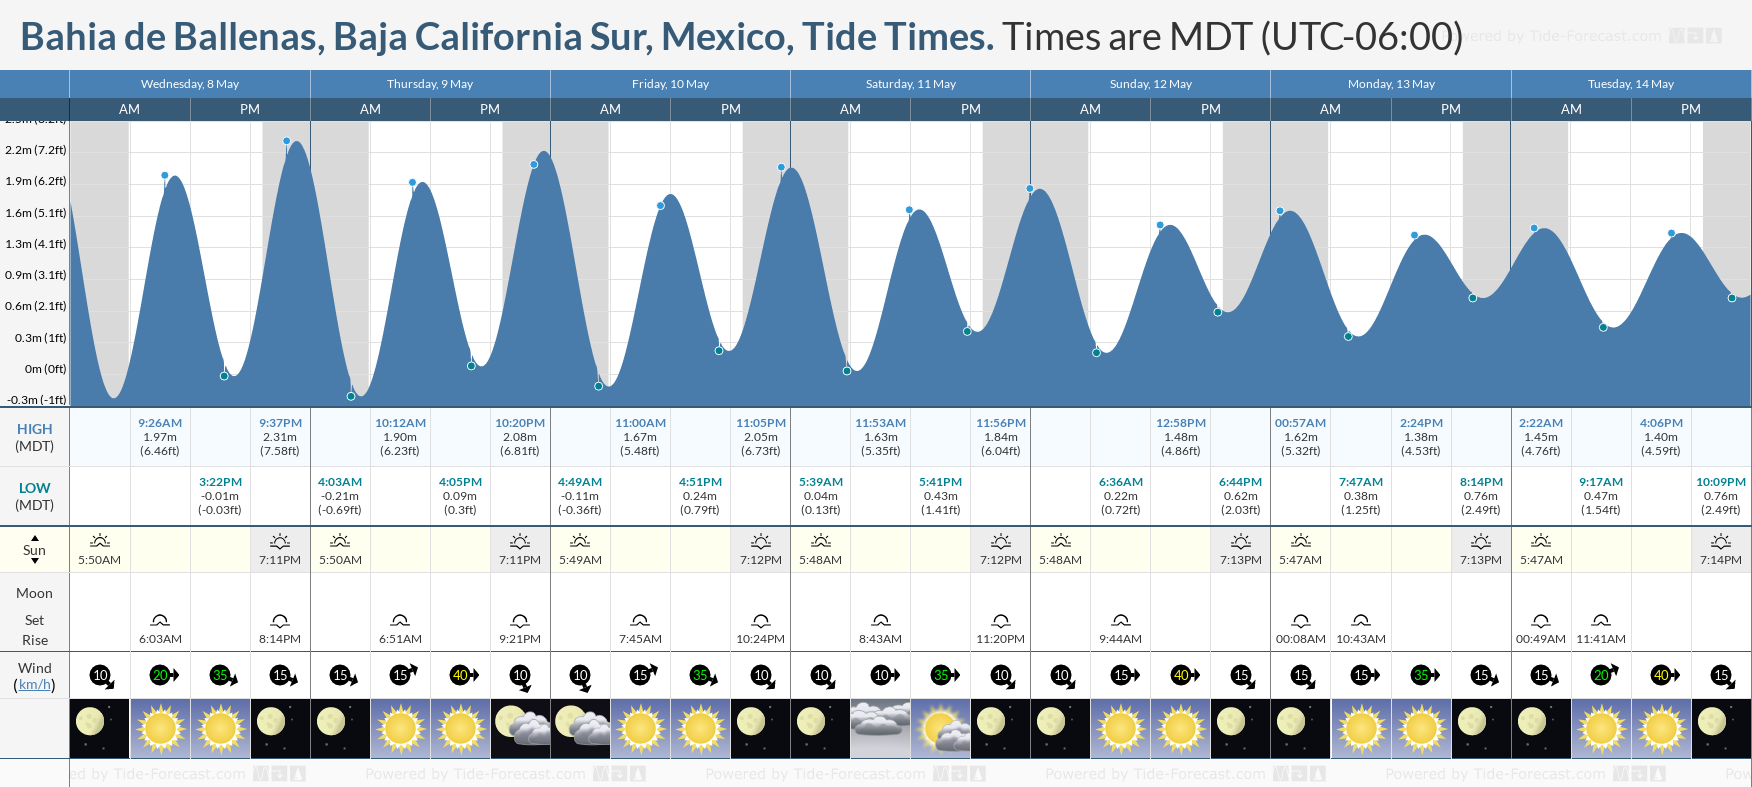 Bahia de Ballenas, Baja California Sur, Mexico Tide Chart including high and low tide tide times for the next 7 days